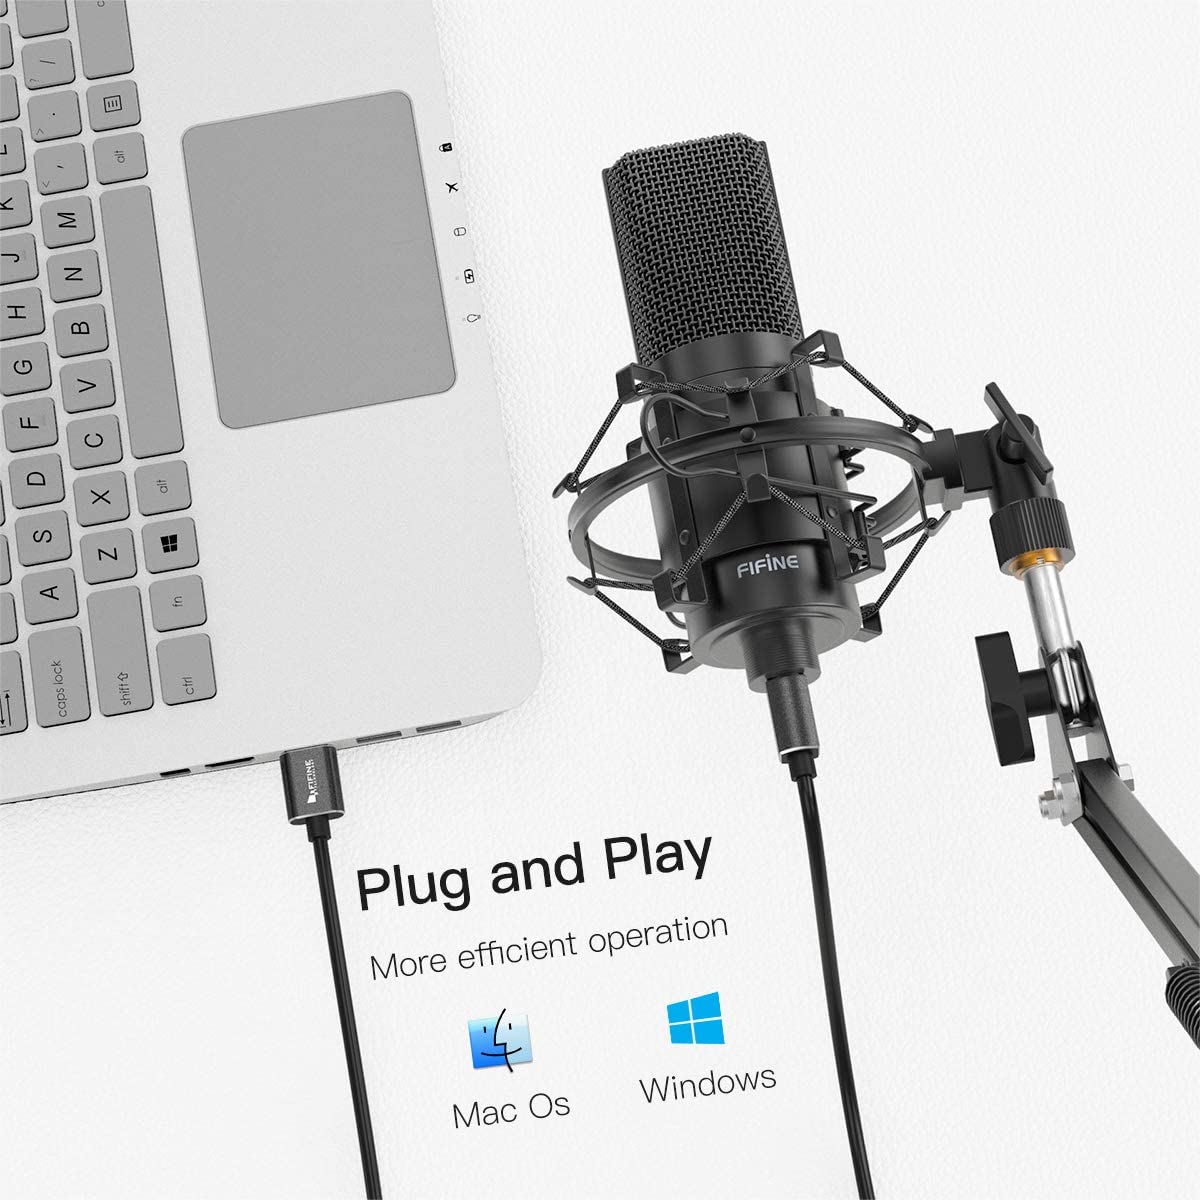 FIFINE K780 USB Streaming Microphone Kit, Condenser Studio Mic with Arm Stand & Pop Filter for Podcast Vocal Recording Singing YouTube Gaming Voice Over, Directional Computer Mic for PC iMac Laptop